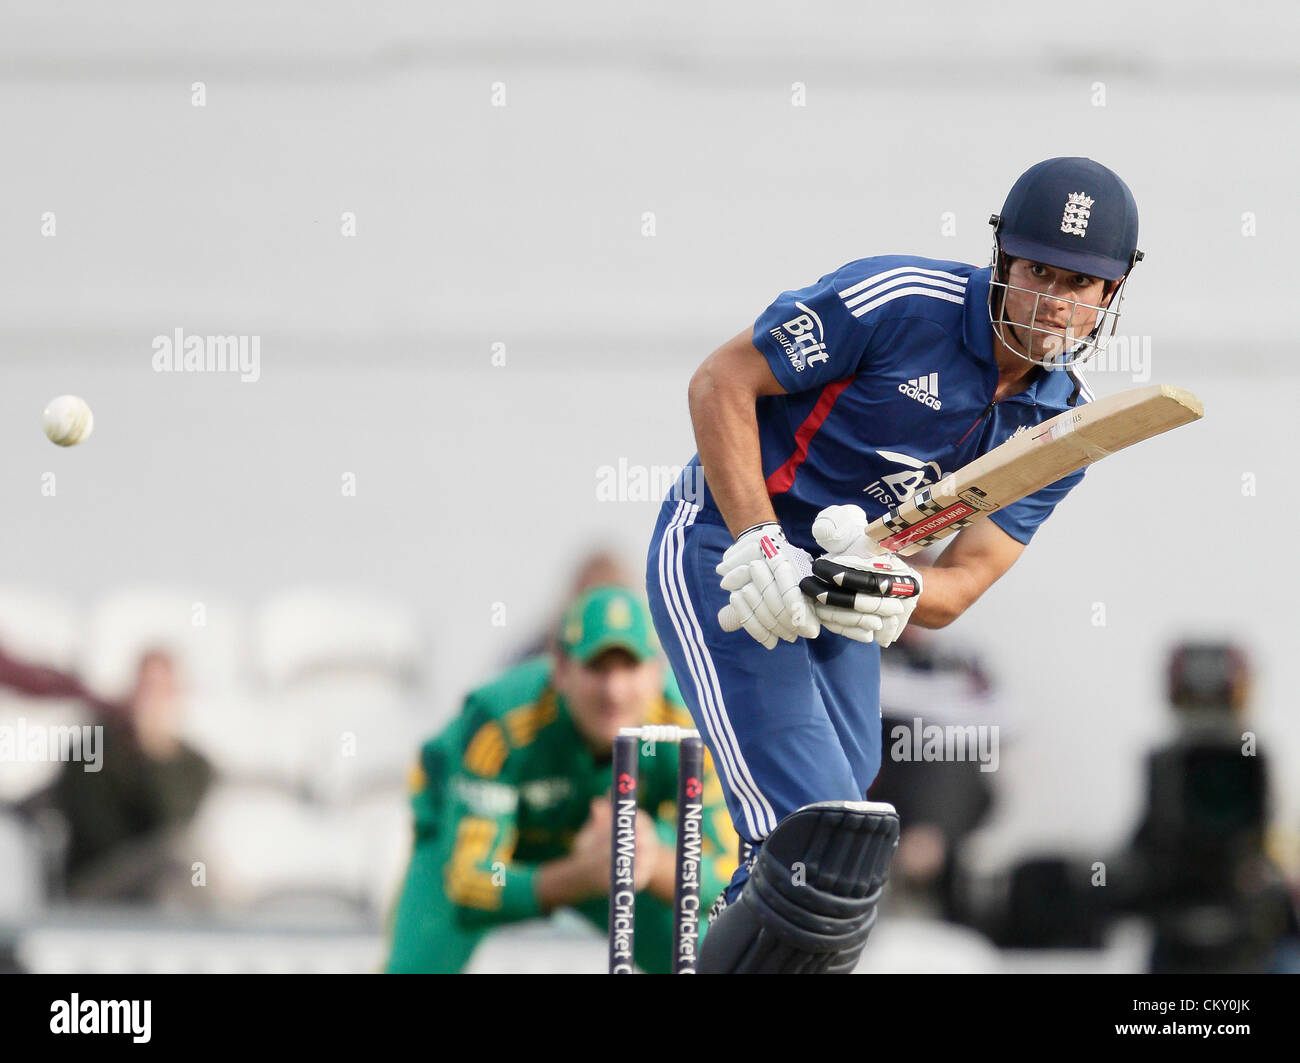 31.08.2012. London England Alistair Cook in batting action during the England v South Africa: 3rd Natwest ODI at The Kia Oval Cricket Ground Kennington London England. England chasing 212 to win this ODI Stock Photo